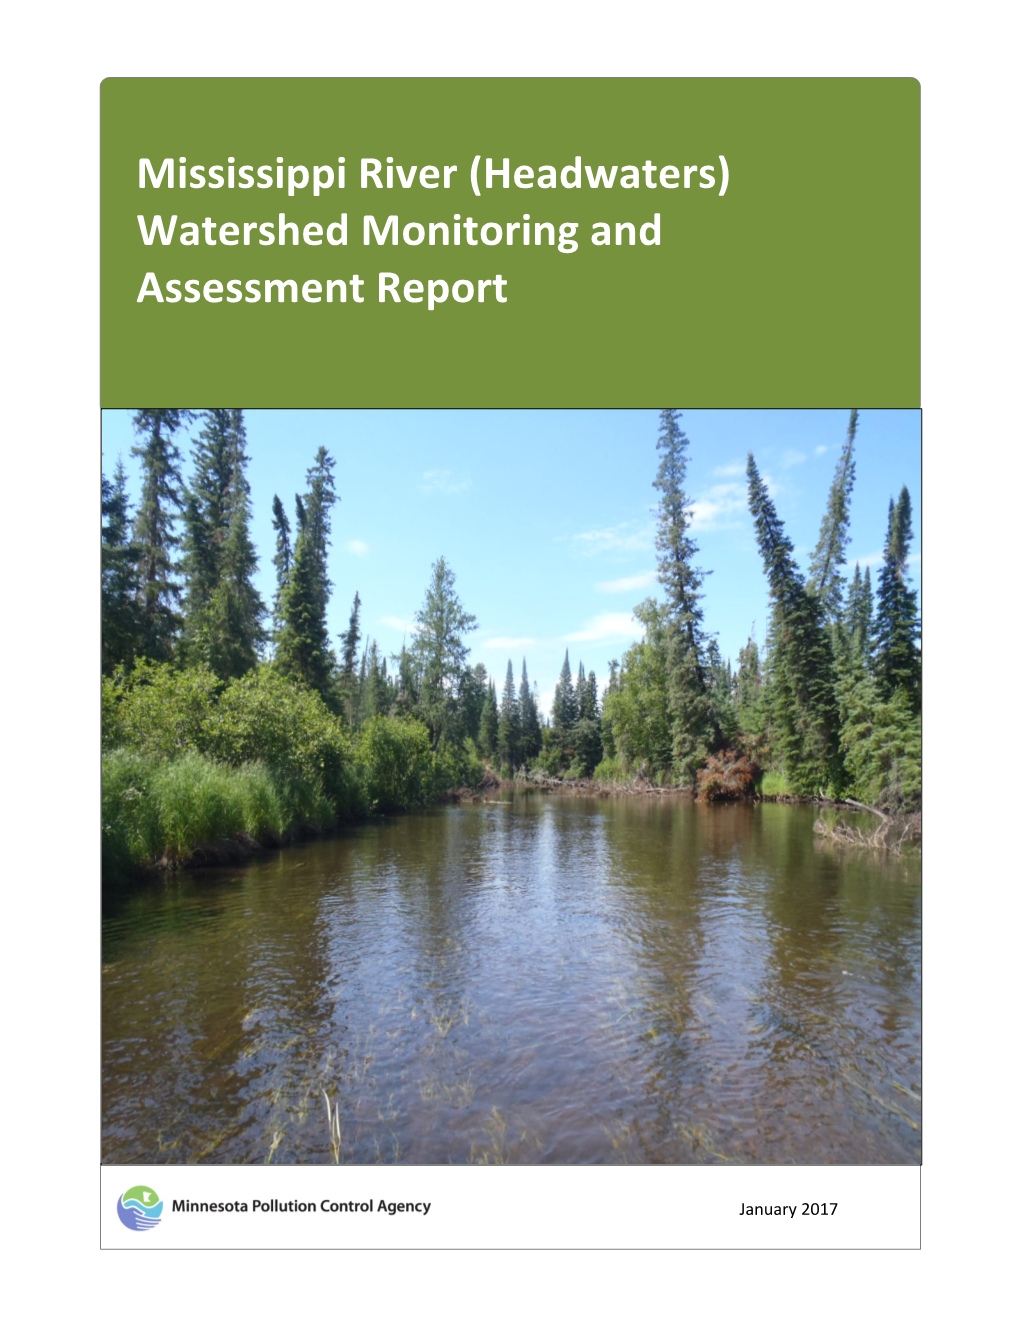 (Headwaters) Watershed Monitoring and Assessment Report